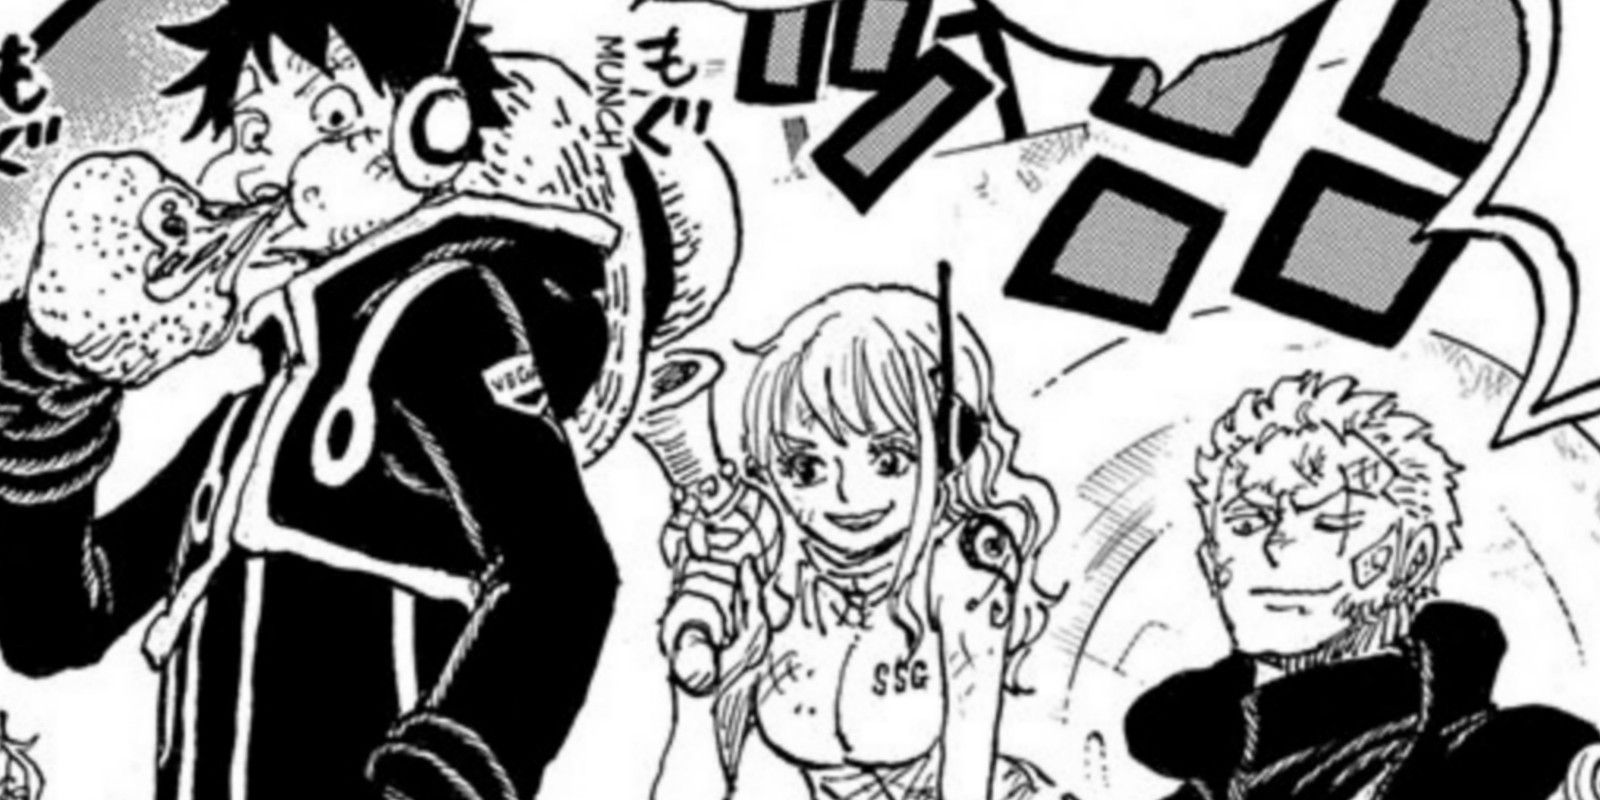 nami Zoro luffy together in One Piece 1105